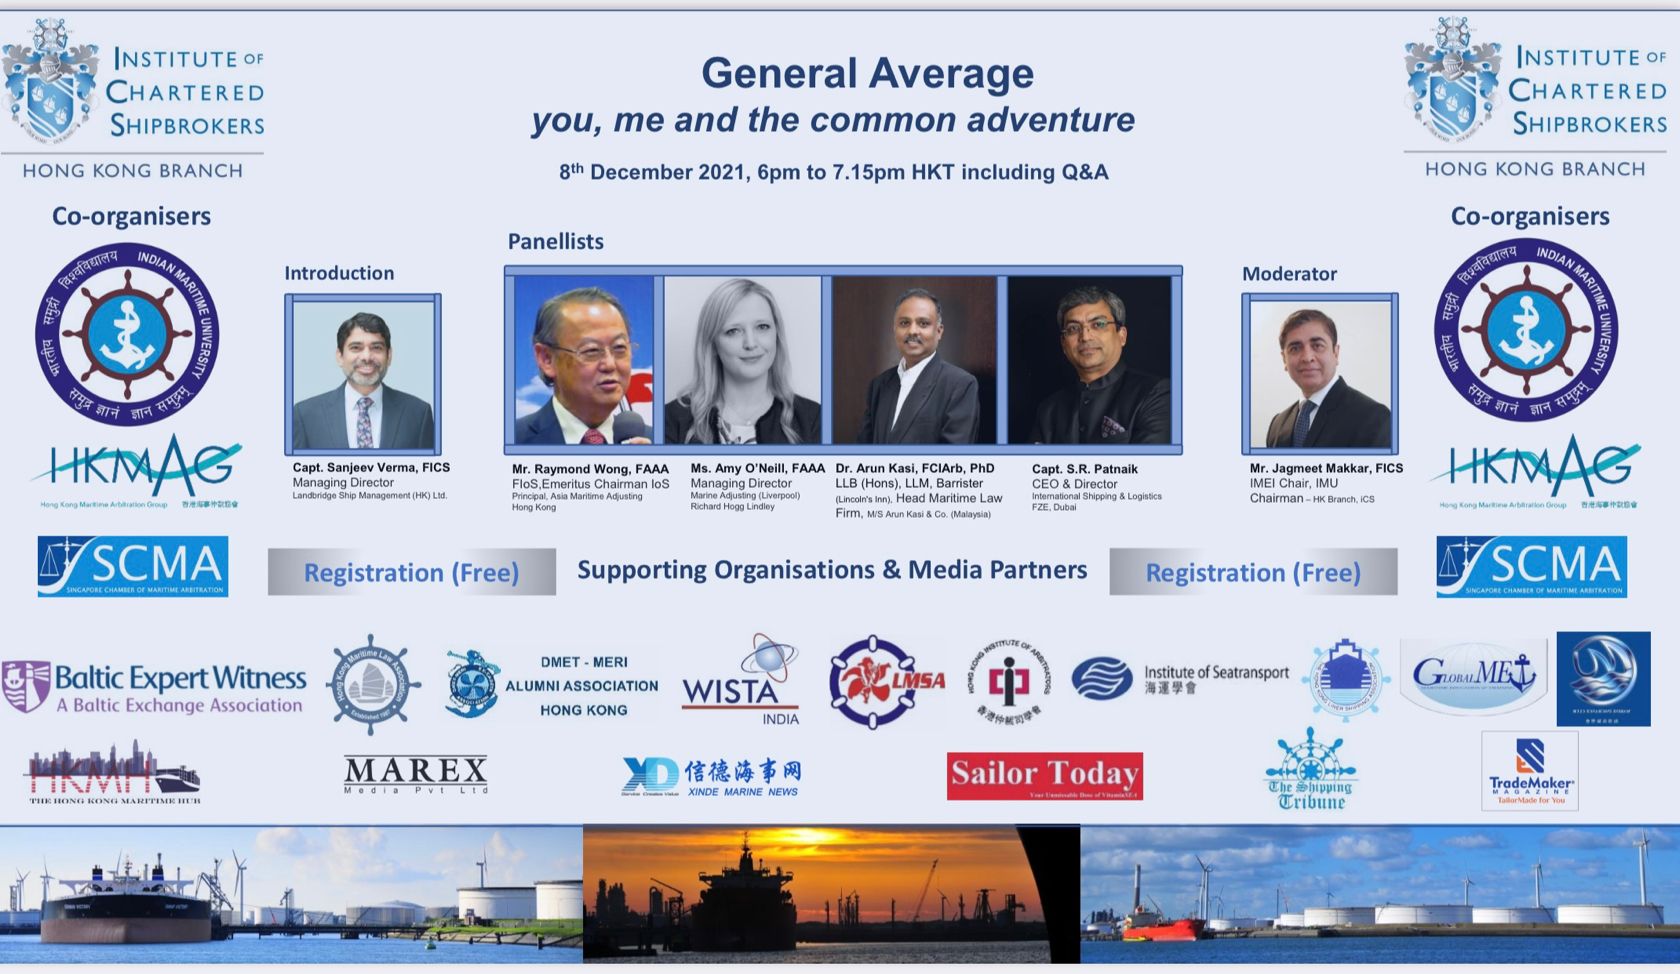 An ICS - Hong Kong Event on General Average be held